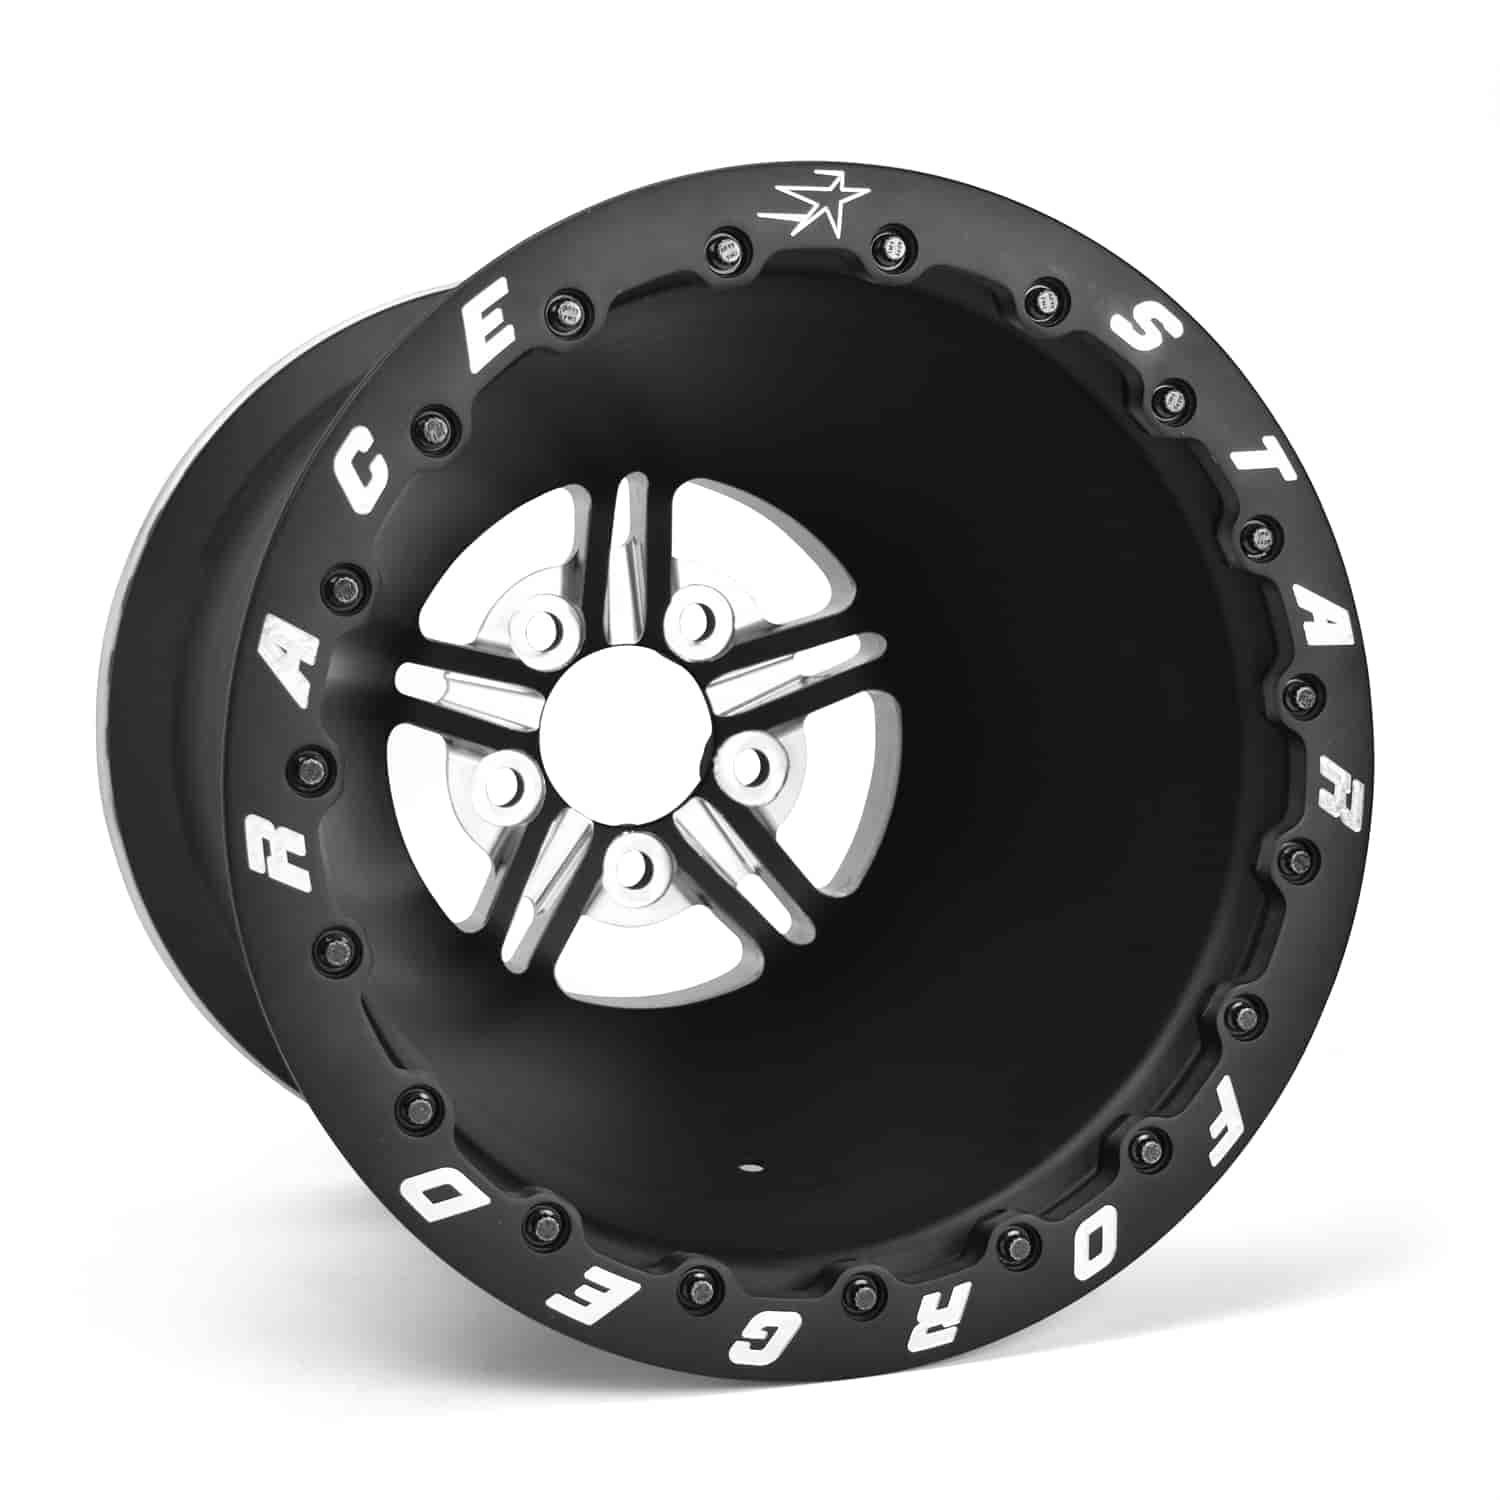 63-Series Pro Forged Double Bead-Lock Top Fuel Wheel